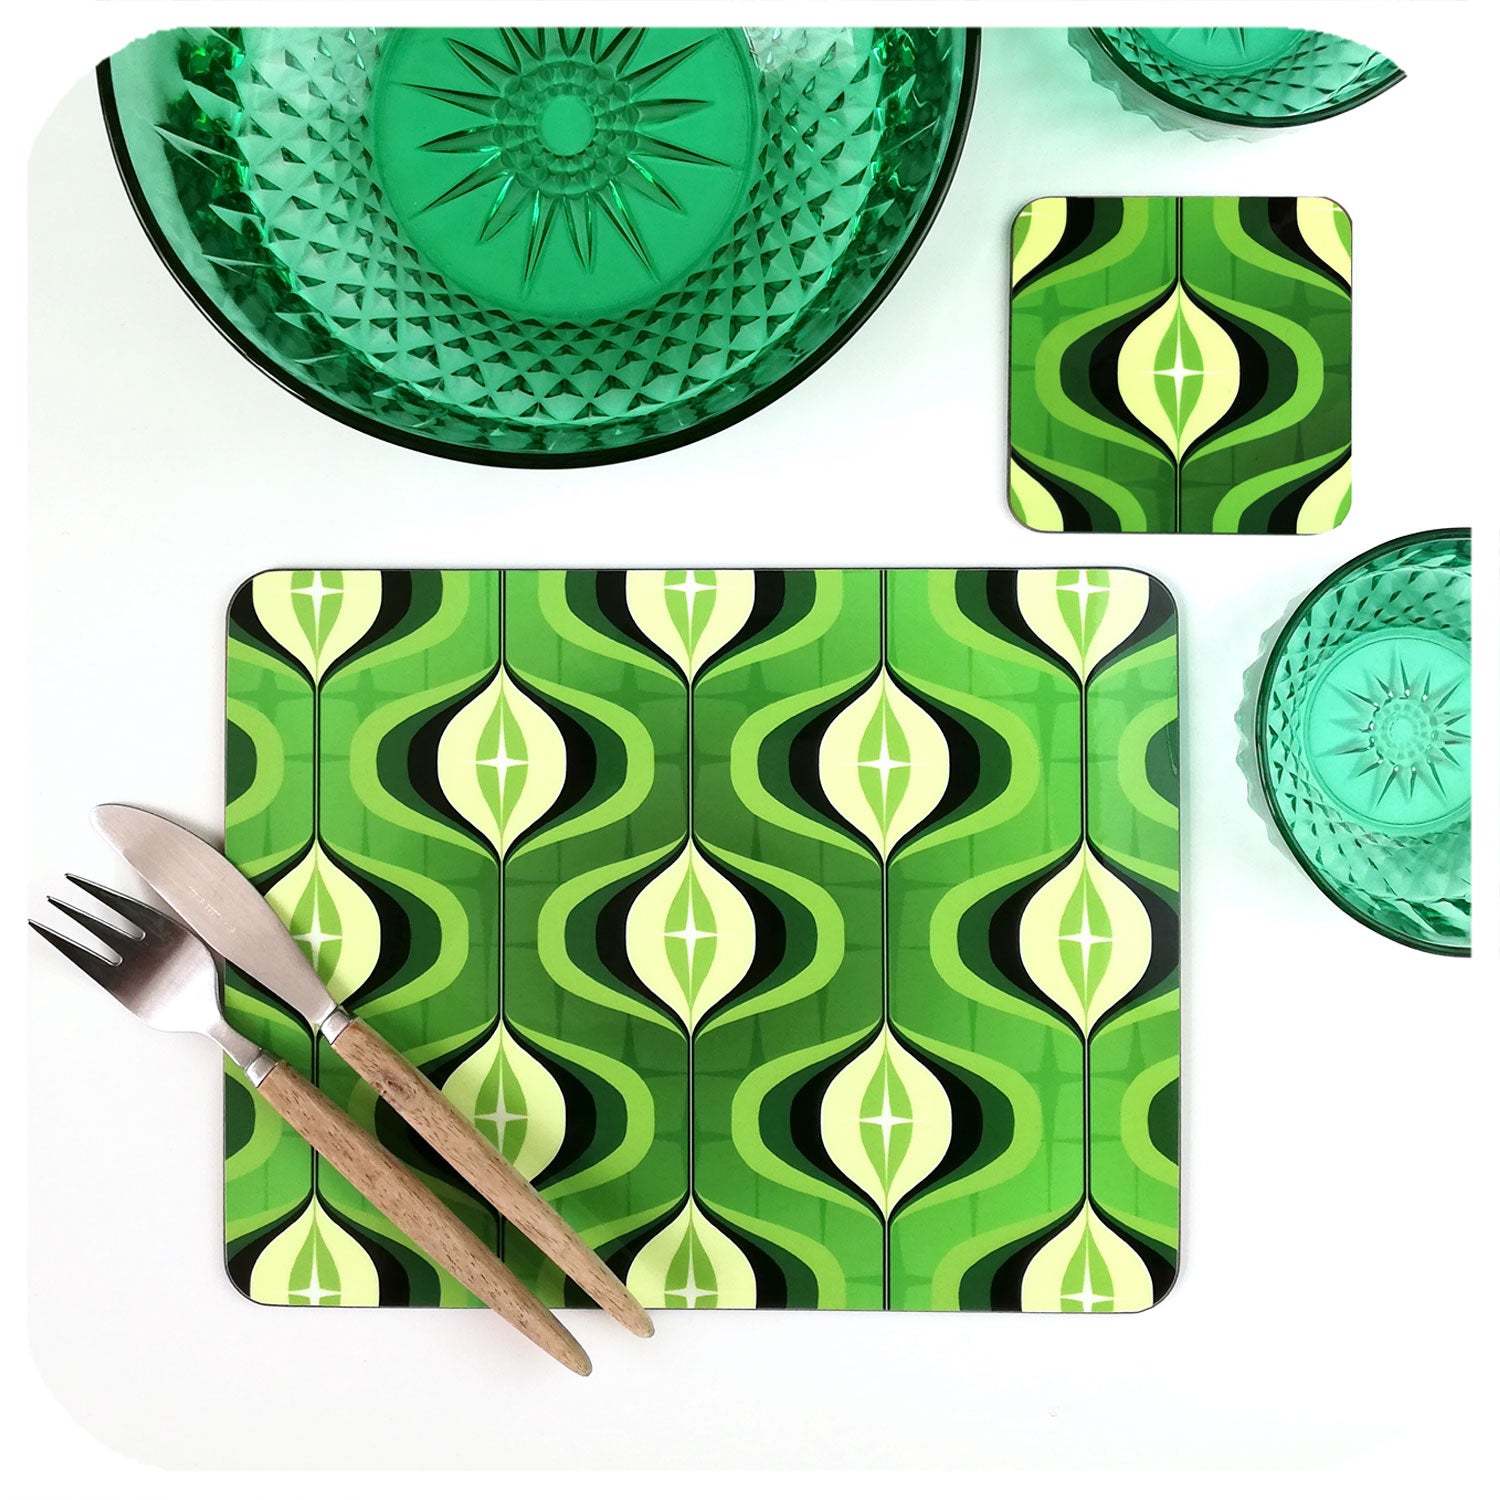 1970s Green Op Art Placemat and matching coasters | The Inkabilly Emporium